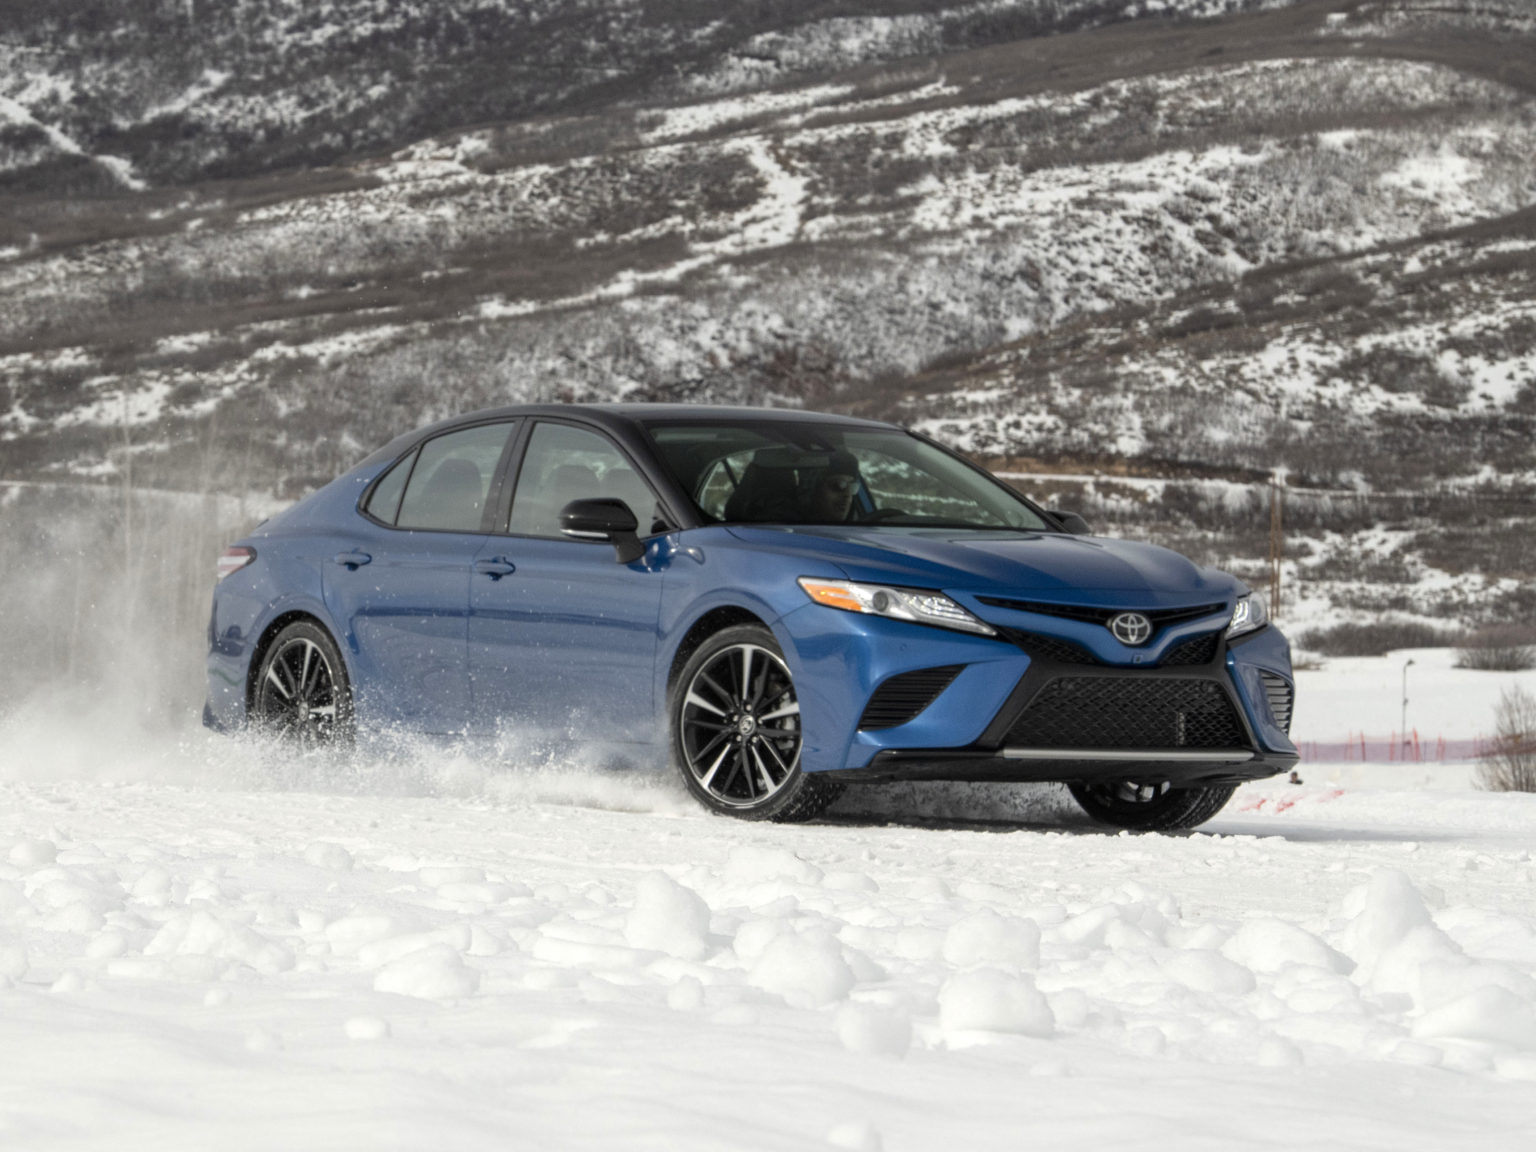 The all-wheel drive system of the 2020 Toyota Camry was put to the test in Park City, Utah in early February by the AutomotiveMap team.